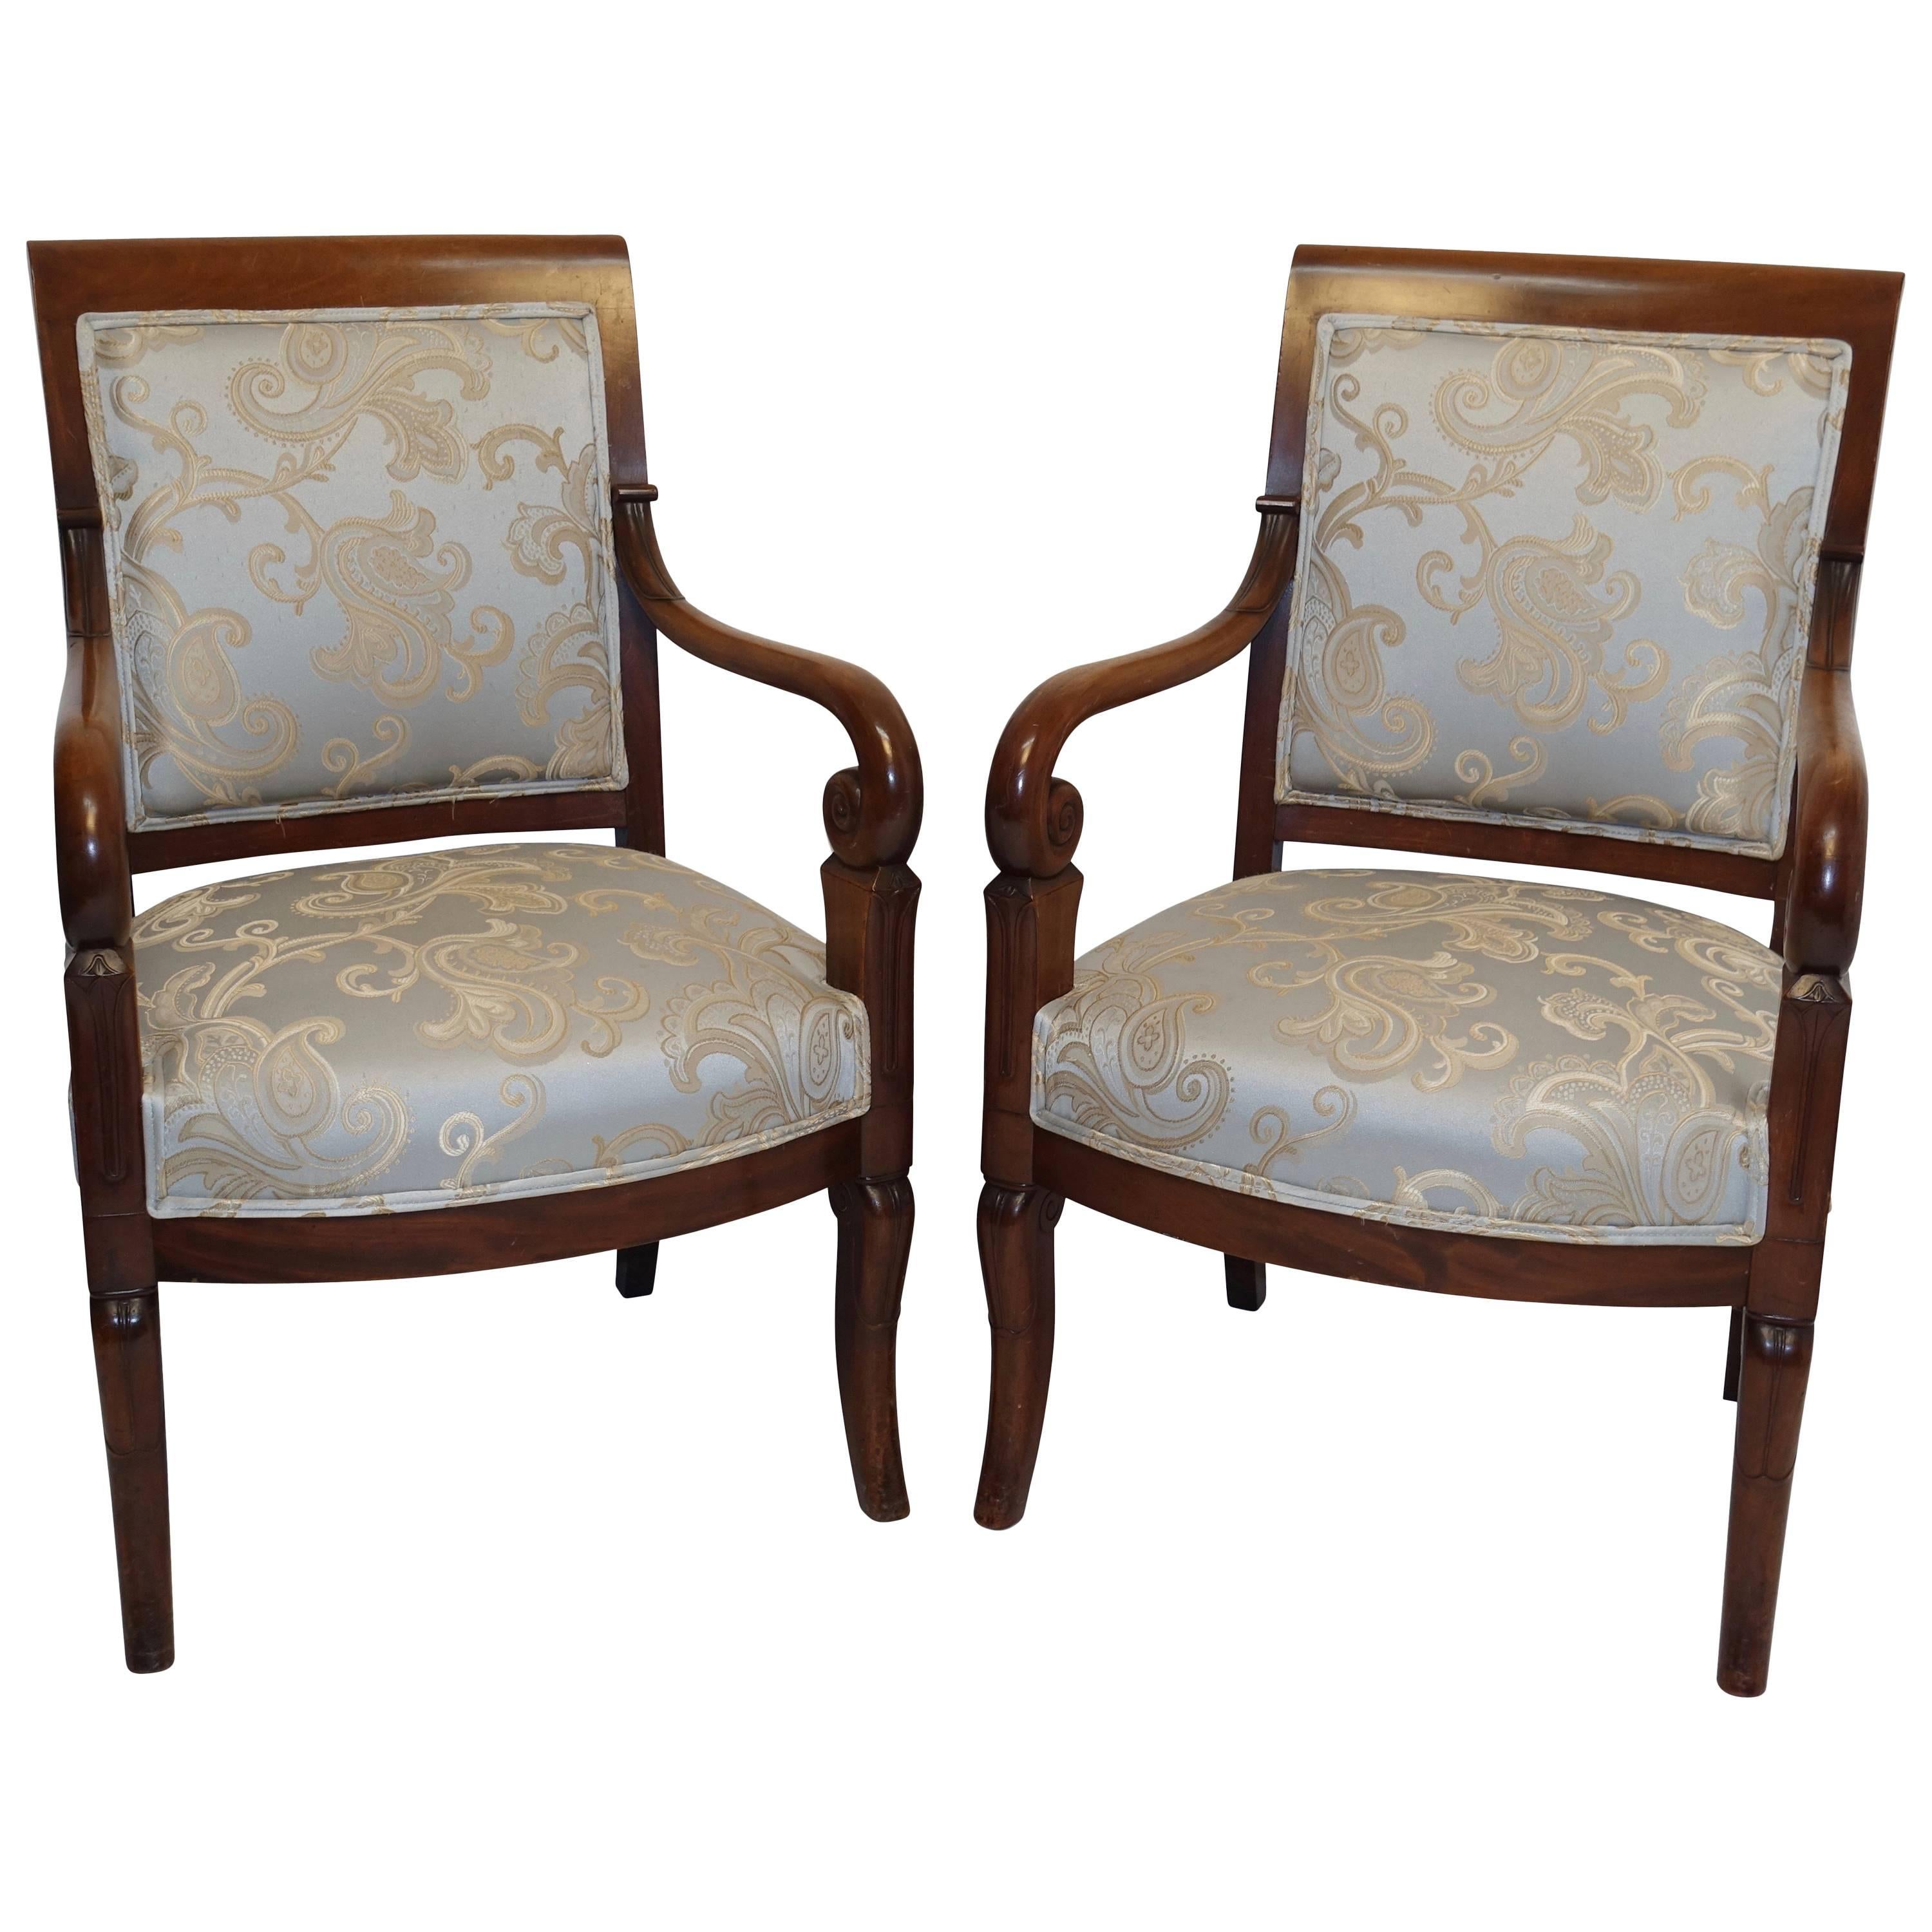 Pair of Charles X Walnut Fauteuils, French, circa 1830 For Sale